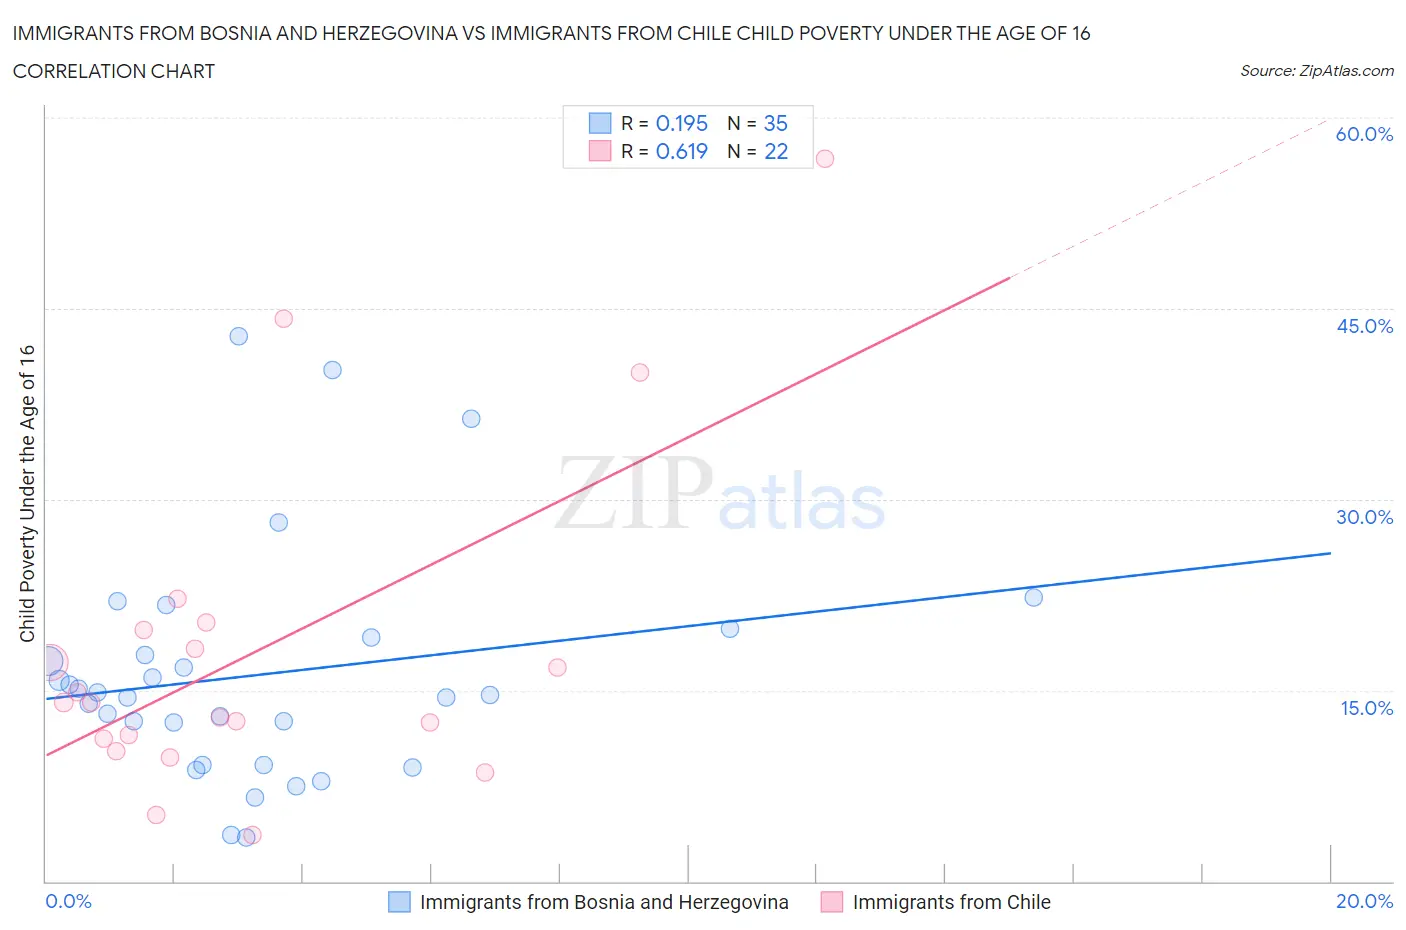 Immigrants from Bosnia and Herzegovina vs Immigrants from Chile Child Poverty Under the Age of 16